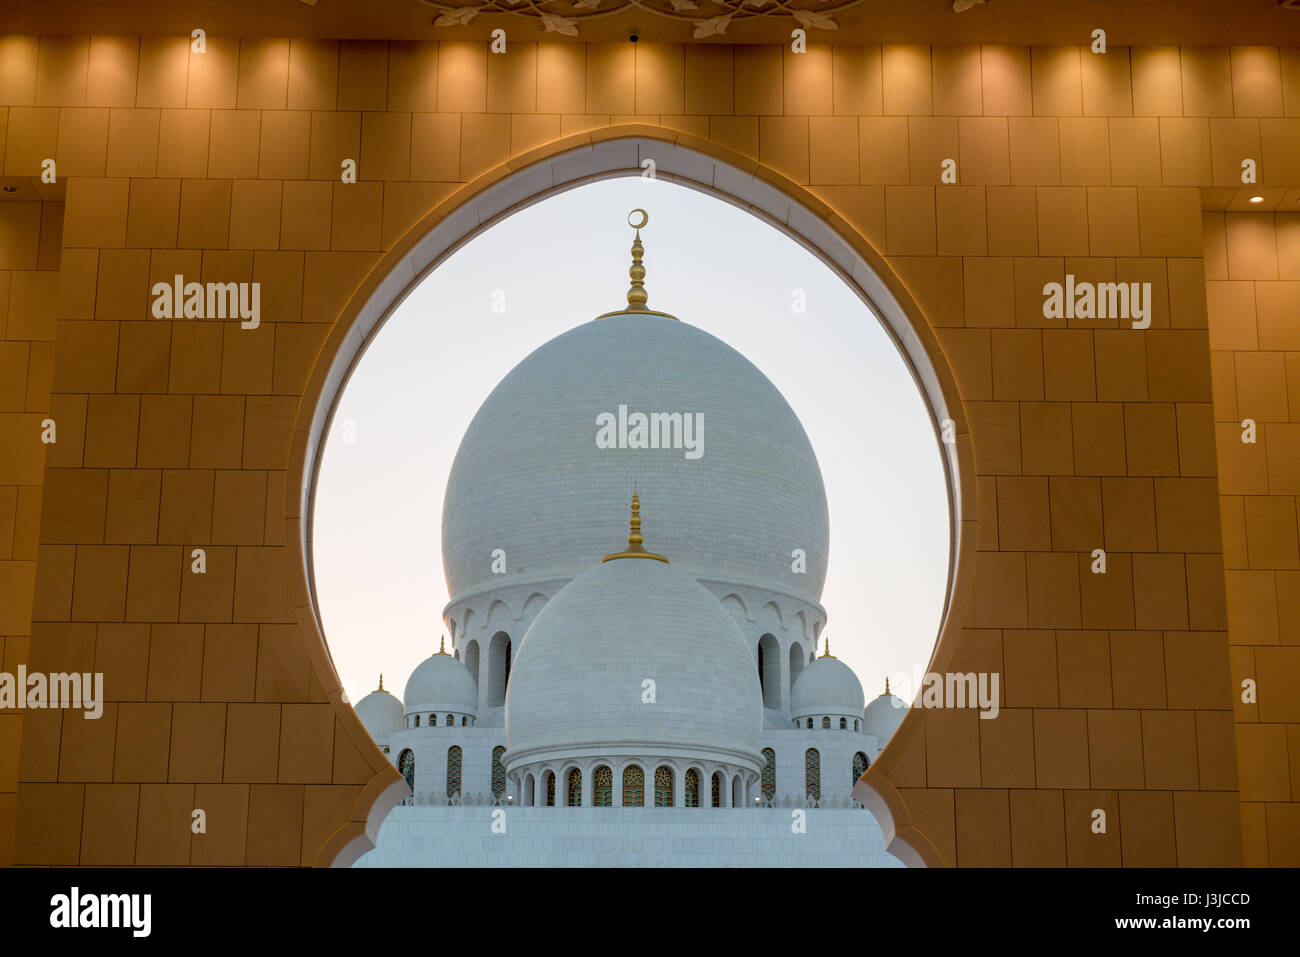 United Arab Emirates - Two mighty domes within arch of Sheikh Zayed Mosque in Abu Dhabi Stock Photo